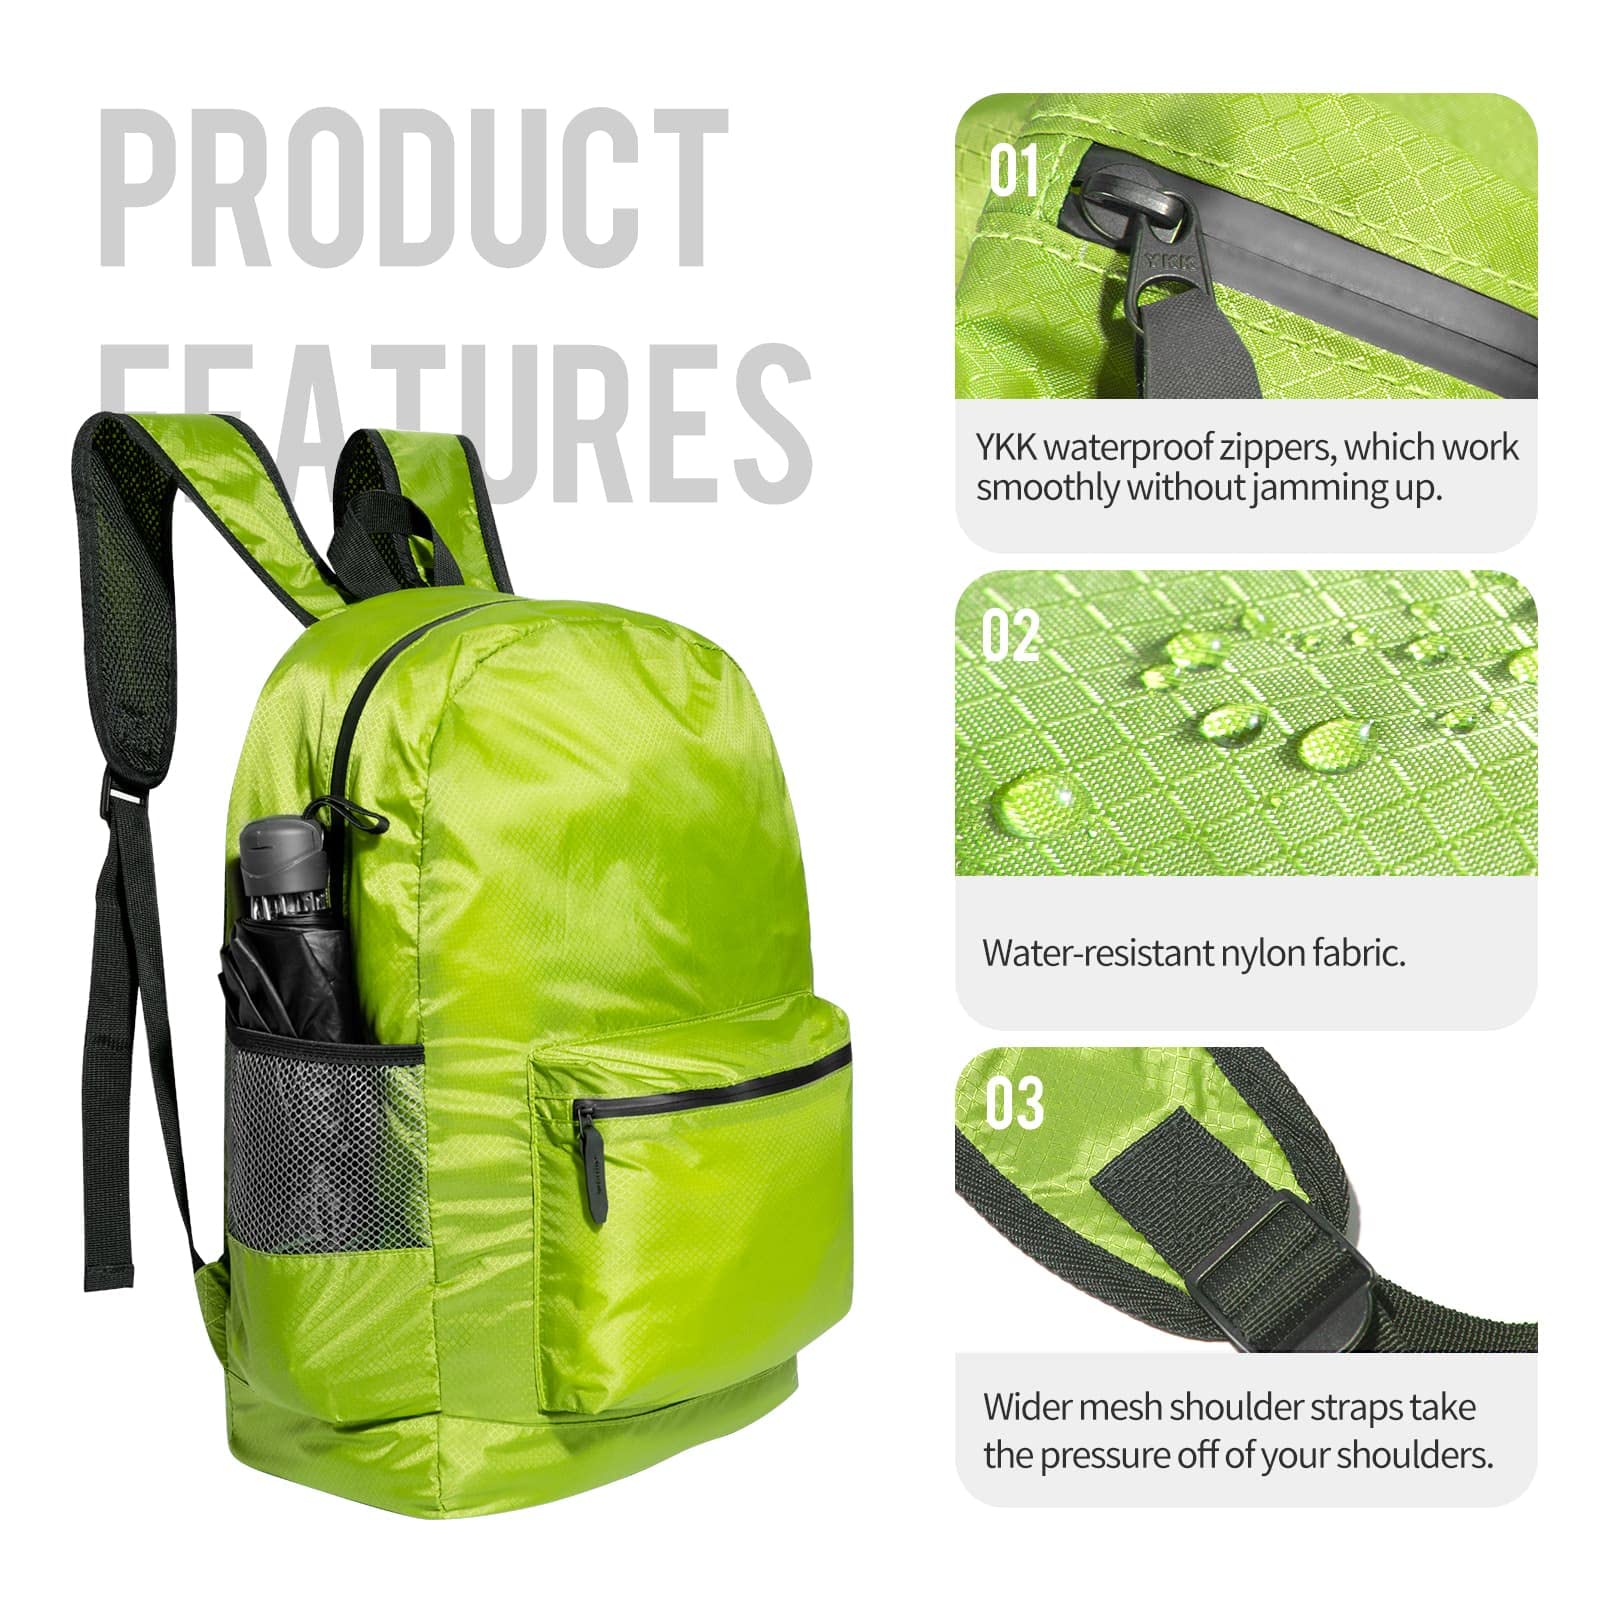 20L Lightweight Packable Backpack Product Details